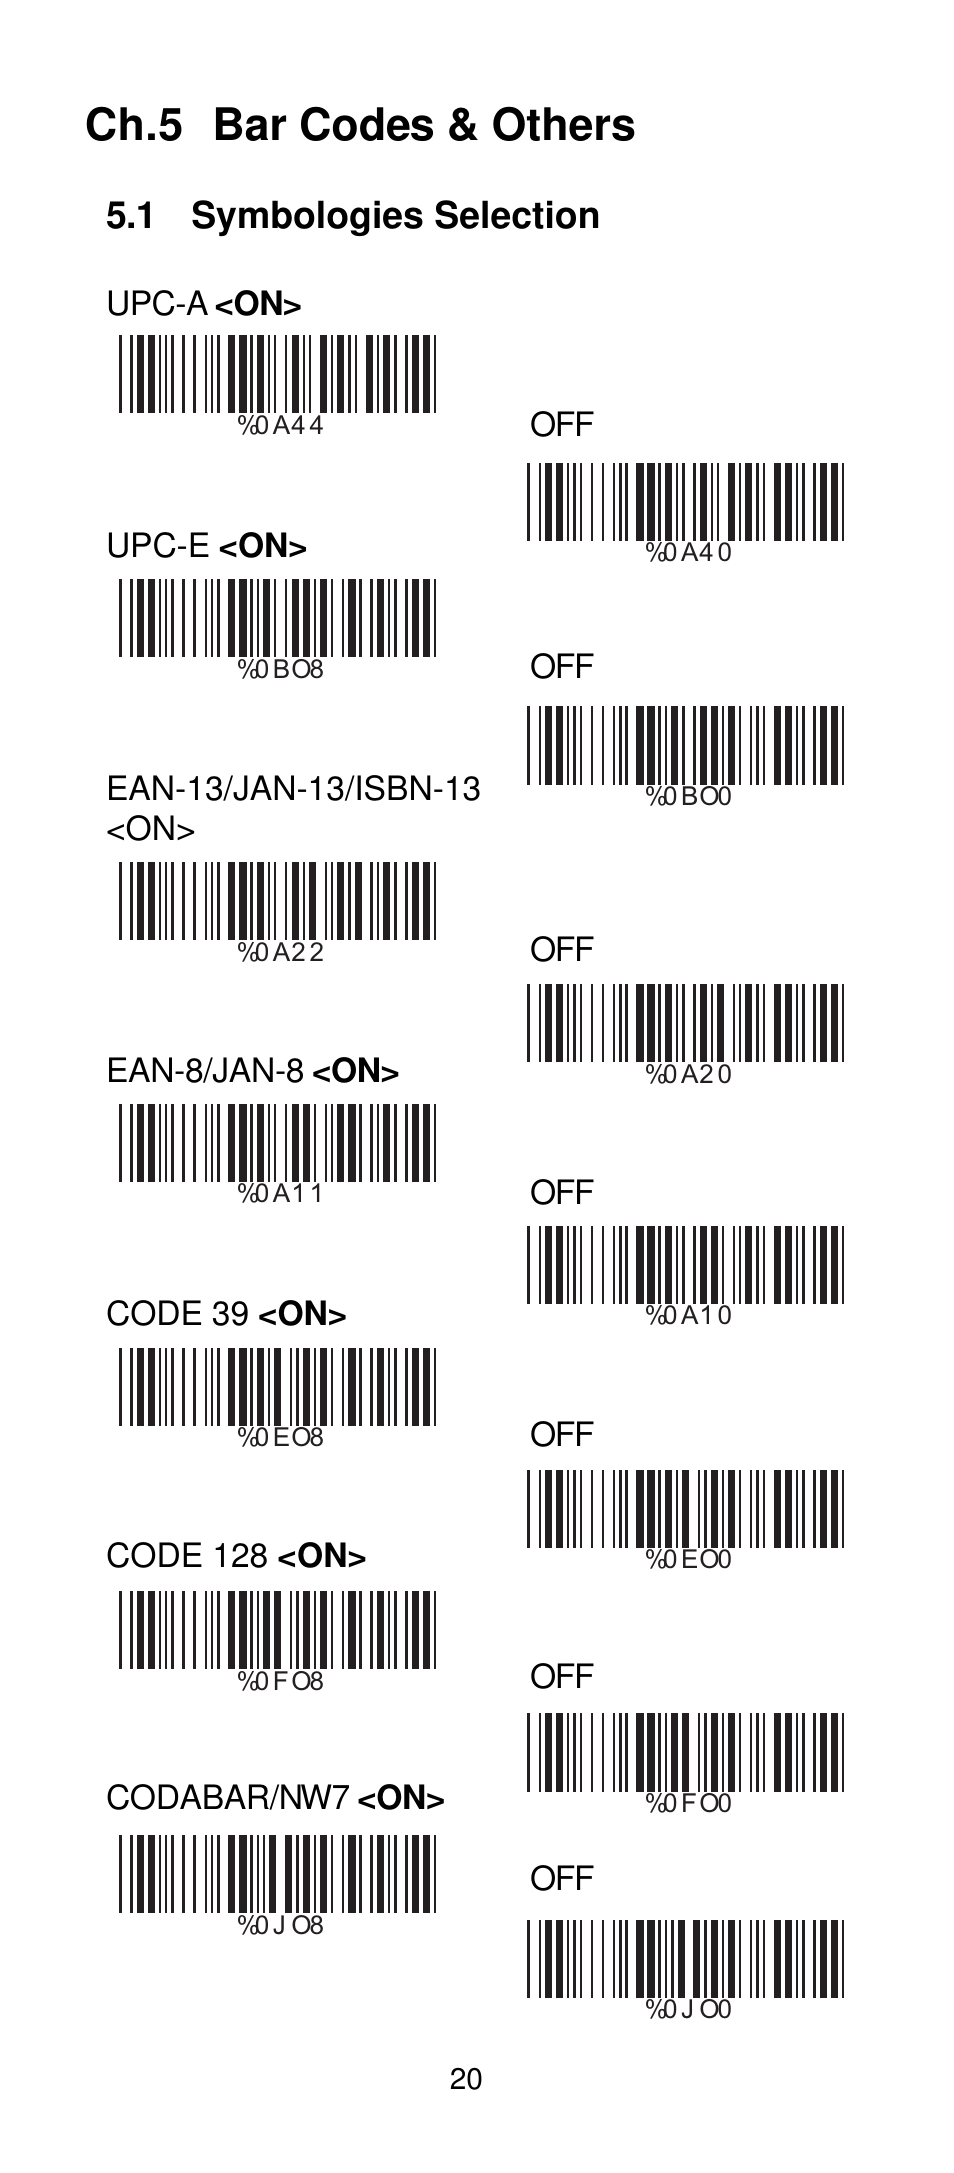 Ch.5 bar codes & others, 1 symbologies selection | Manhattan 401517 Contact  CCD Barcode Scanner - Programming Manual User Manual | Page 23 / 80 |  Original mode